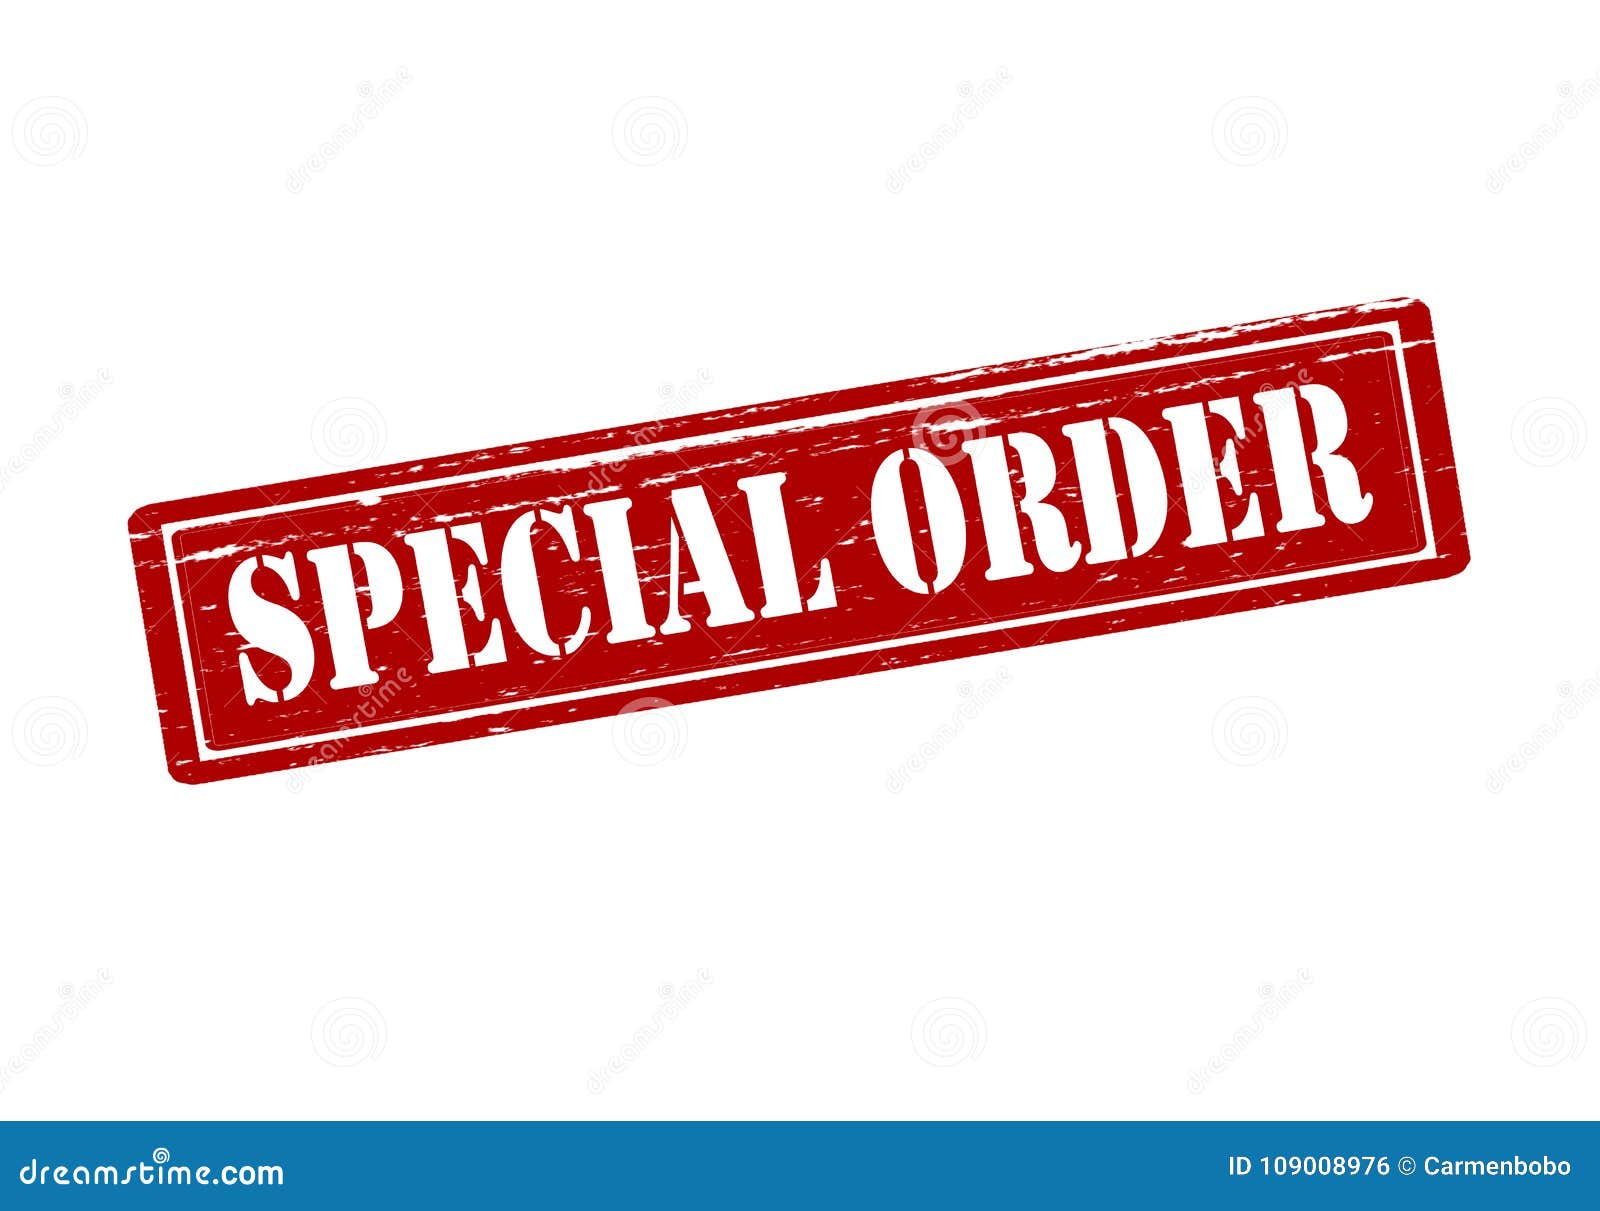 special order 